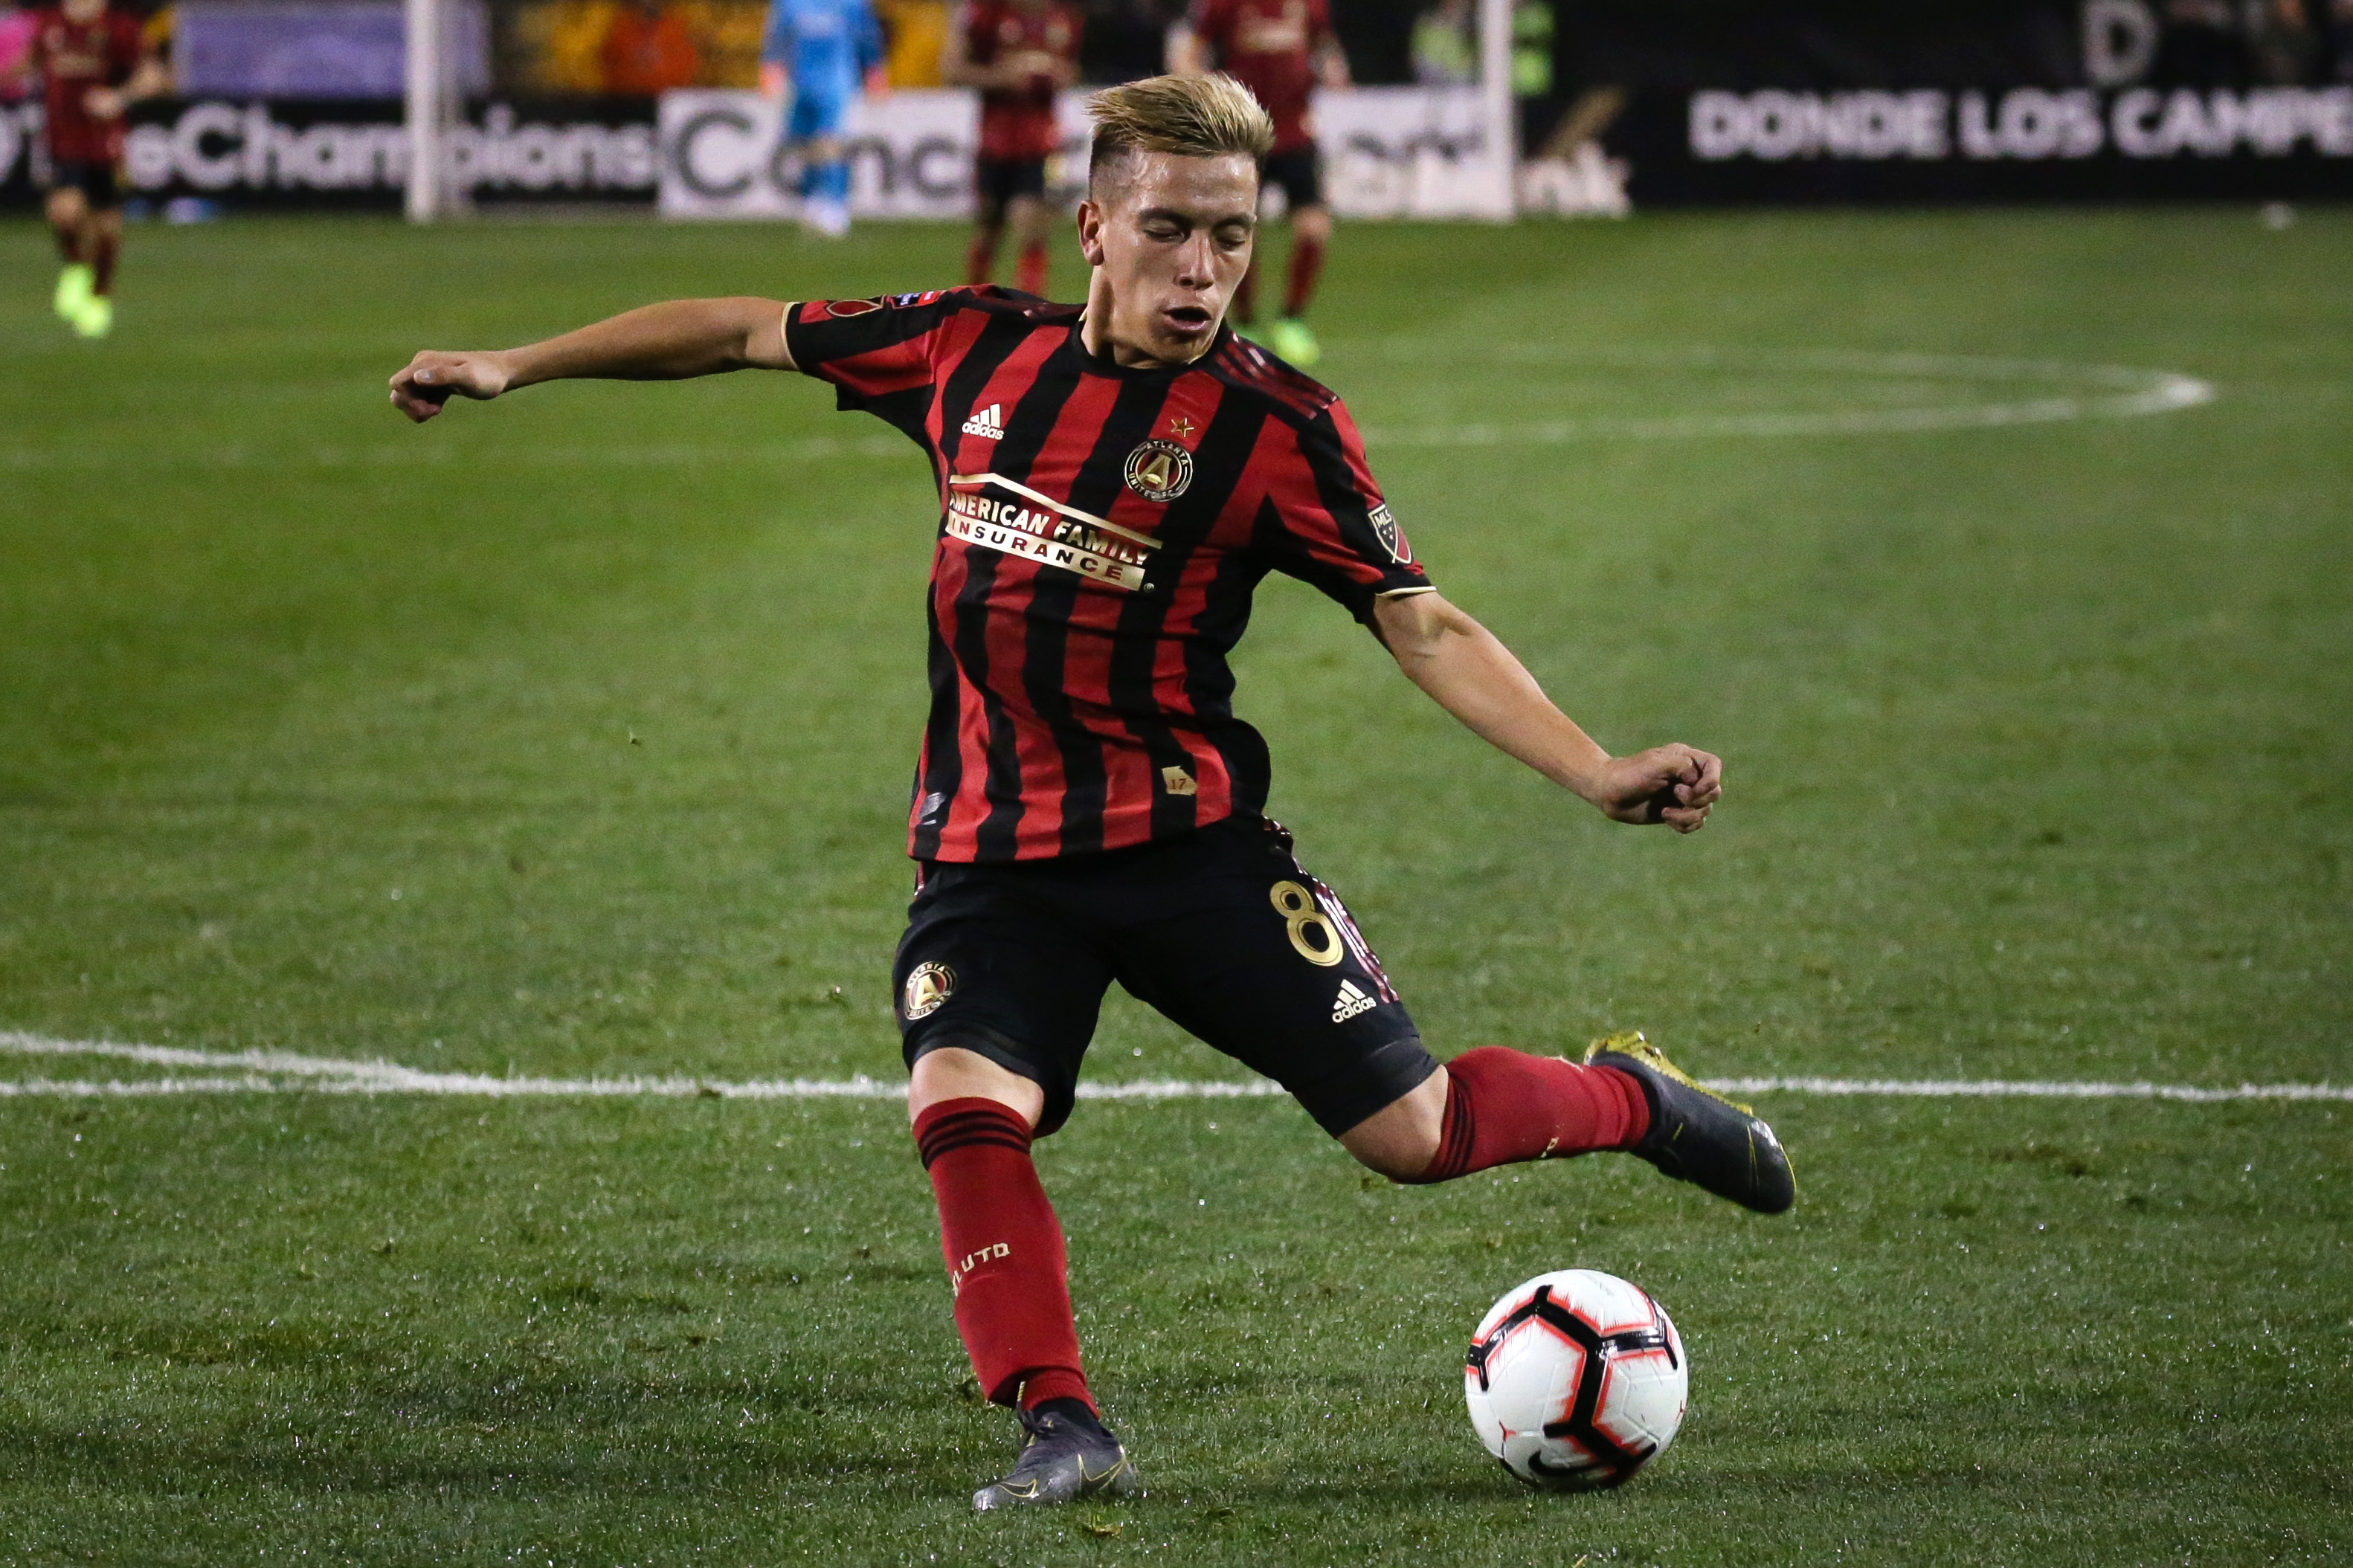 Atlanta United midfielder Ezequiel Barco shoots in the second half of the CONCACAF Champions League playoff football match between Atlanta United and Herediano at the Fifth Third Bank Stadium on February 28, 2019, in Kennesaw, Georgia. (Photo by Elijah Nouvelage / AFP)        (Photo credit should read ELIJAH NOUVELAGE/AFP/Getty Images)